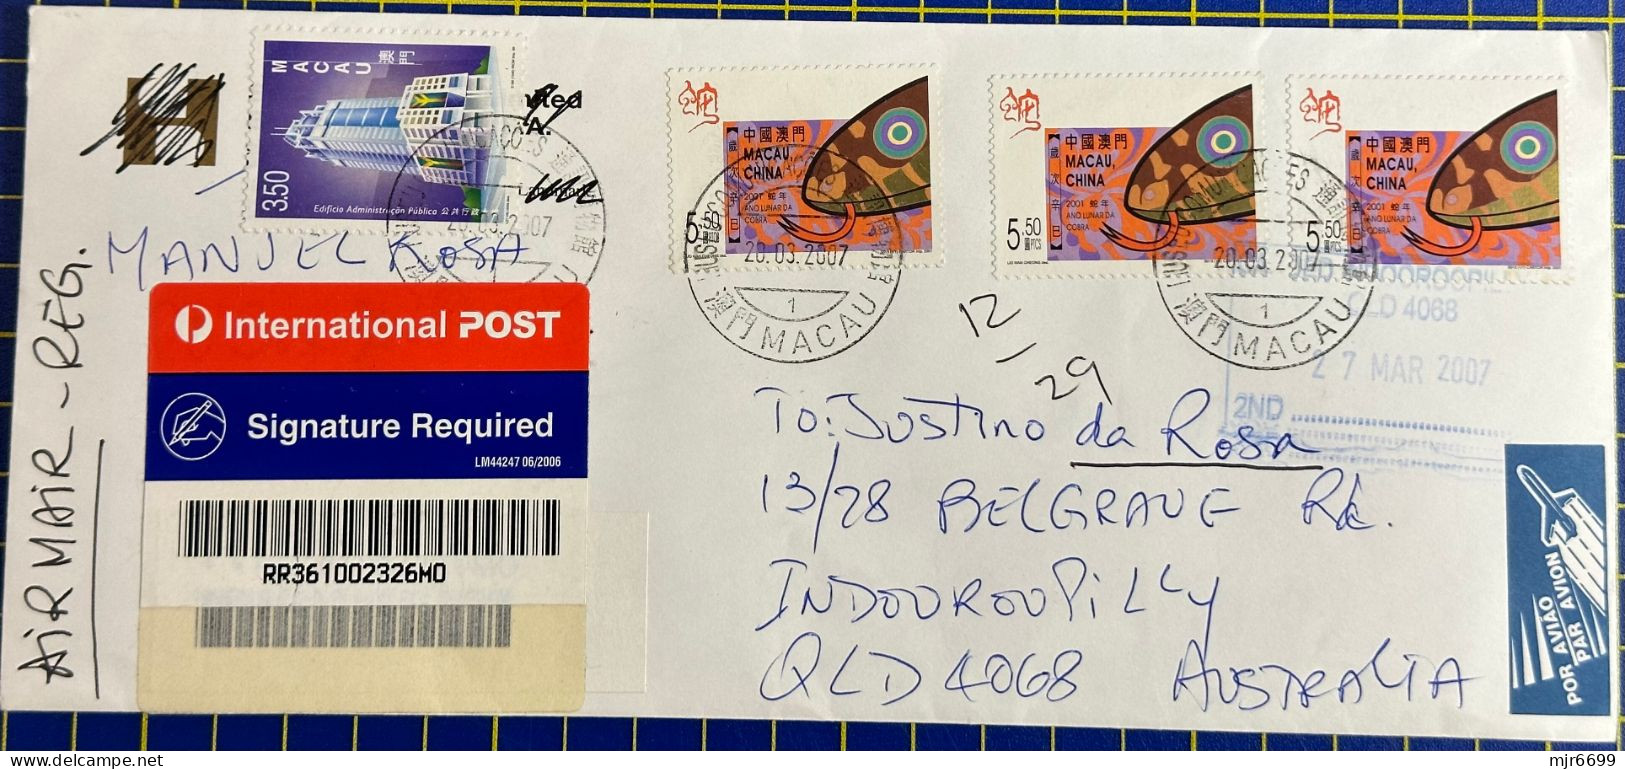 MACAU 2007 REGISTERED COVER TO AUSTRALIA WITH SNAKE AND ATM LABEL STAMPS - Briefe U. Dokumente